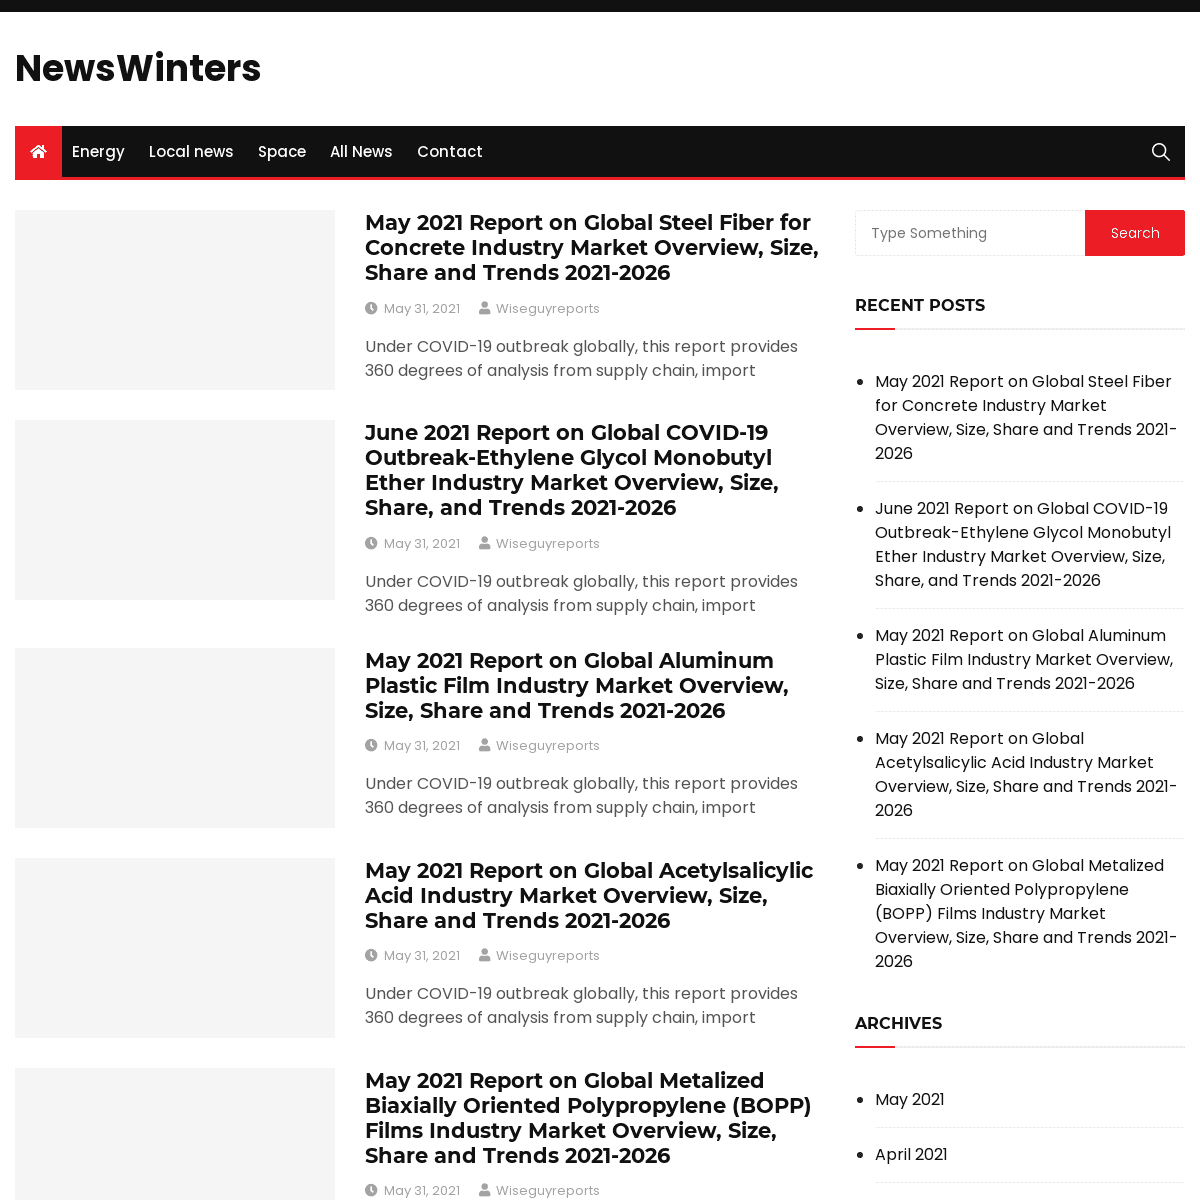 A complete backup of https://newswinters.com